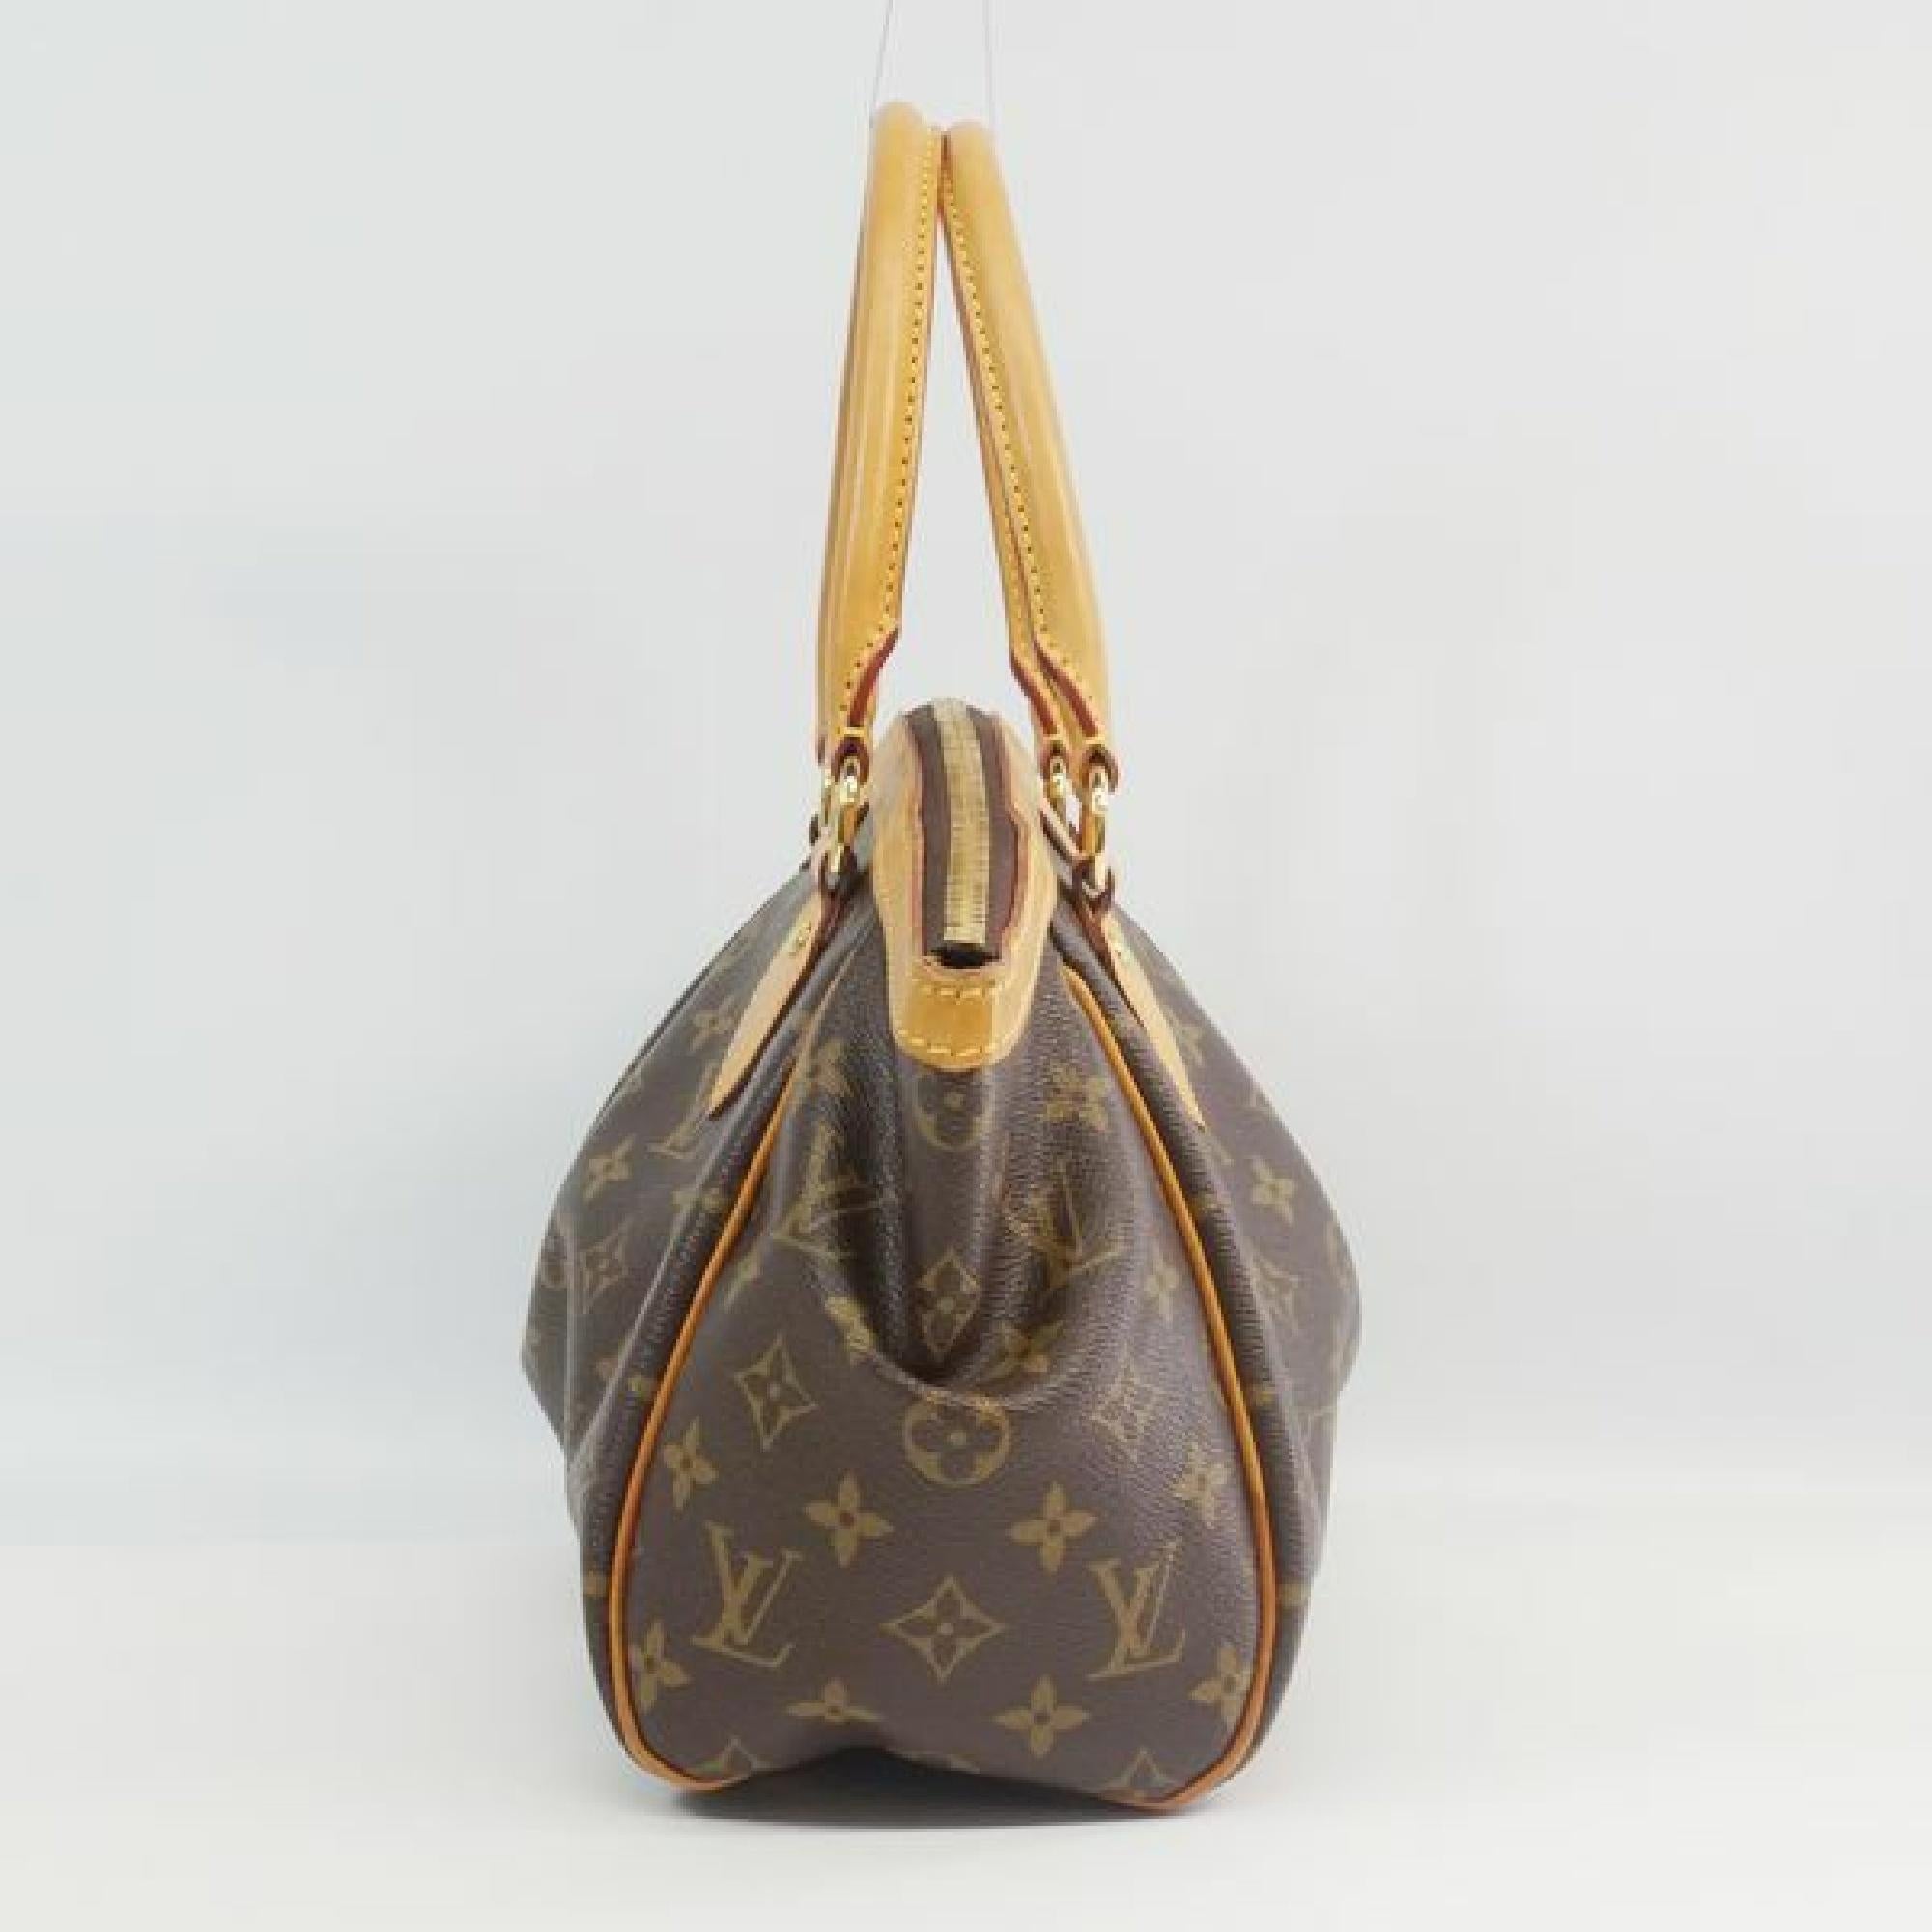 An authentic LOUIS VUITTON Tivoli PM Womens handbag M40143 The outside material is Monogram canvas. The pattern is TivoliPM. This item is Contemporary. The year of manufacture would be 2011.
Rank
AB signs of wear (Small)
Used goods in good condition